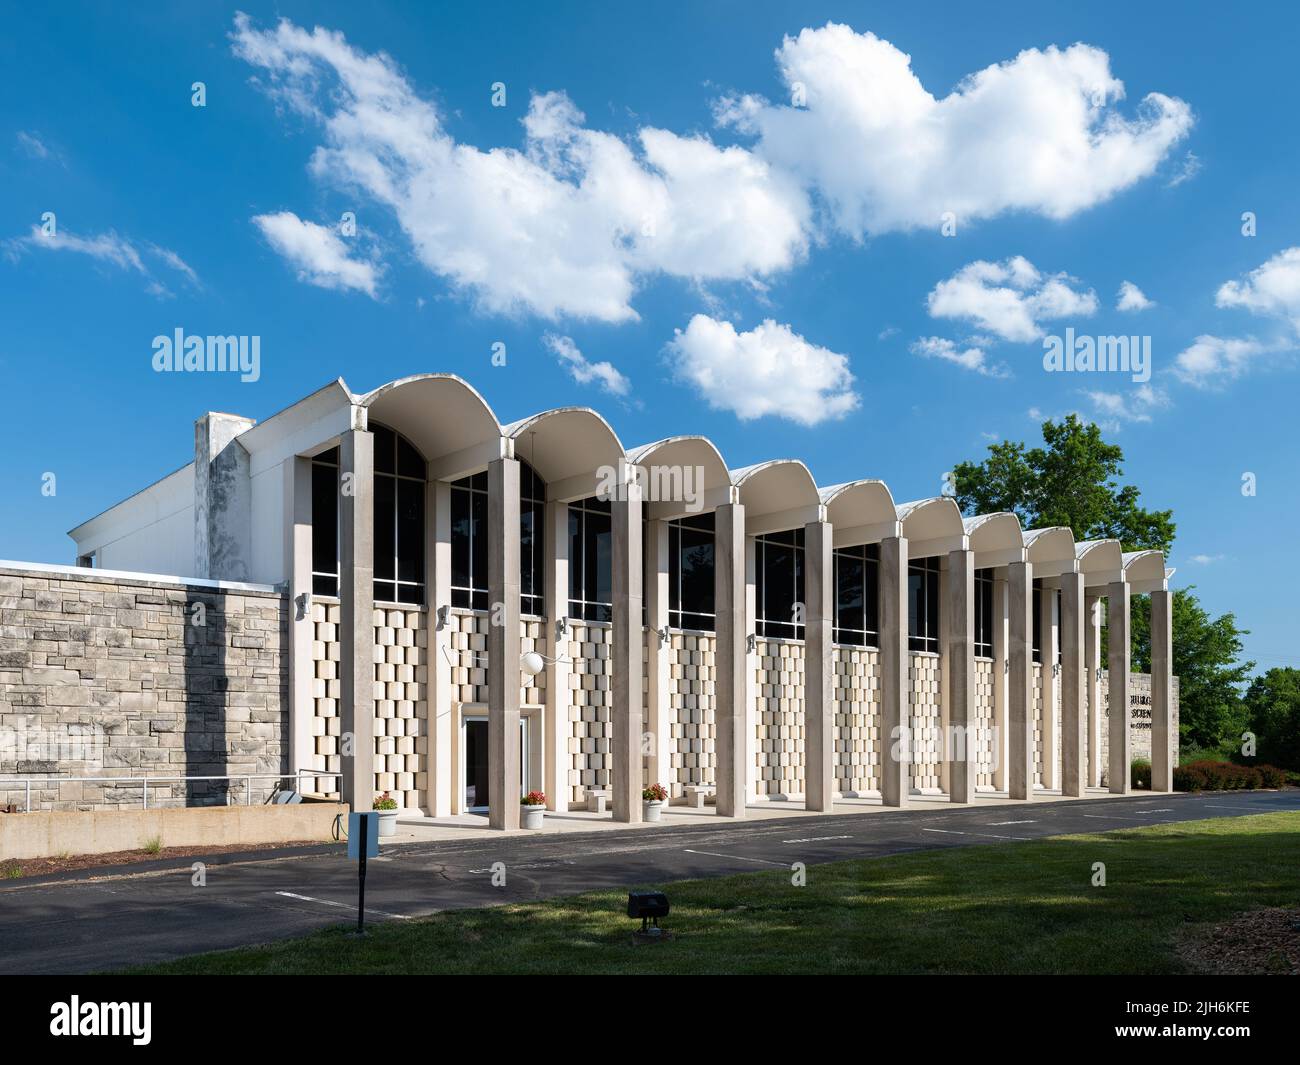 First Church of Christ, Scientist in Town and Country Stock Photo